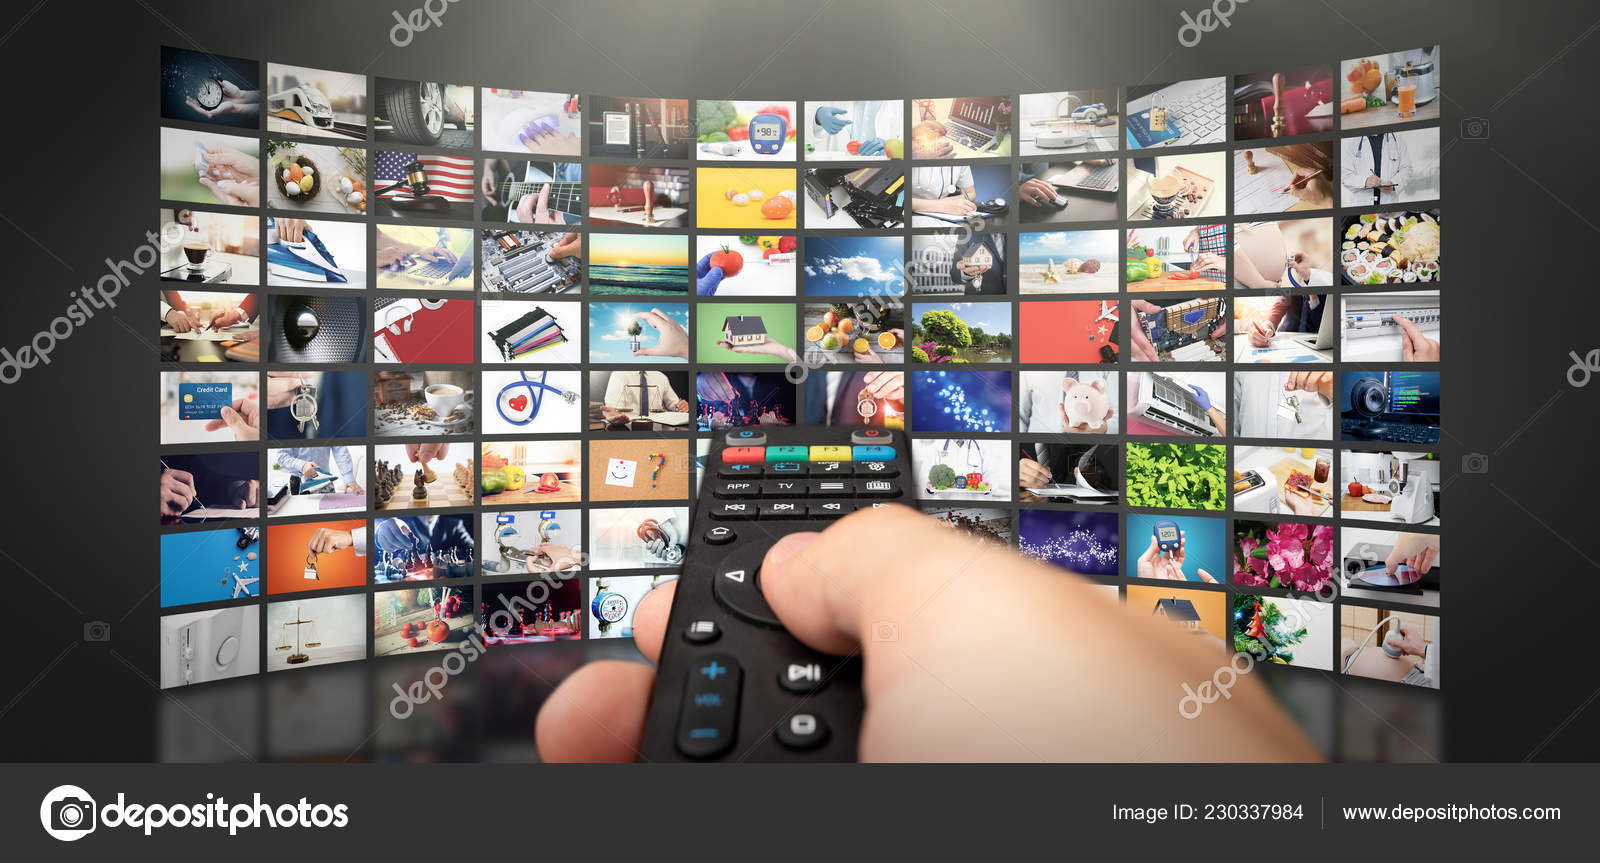 Television Streaming Video Concept Media Video Demand Technology Video Service Stock Photo by ©simpson33 230337984